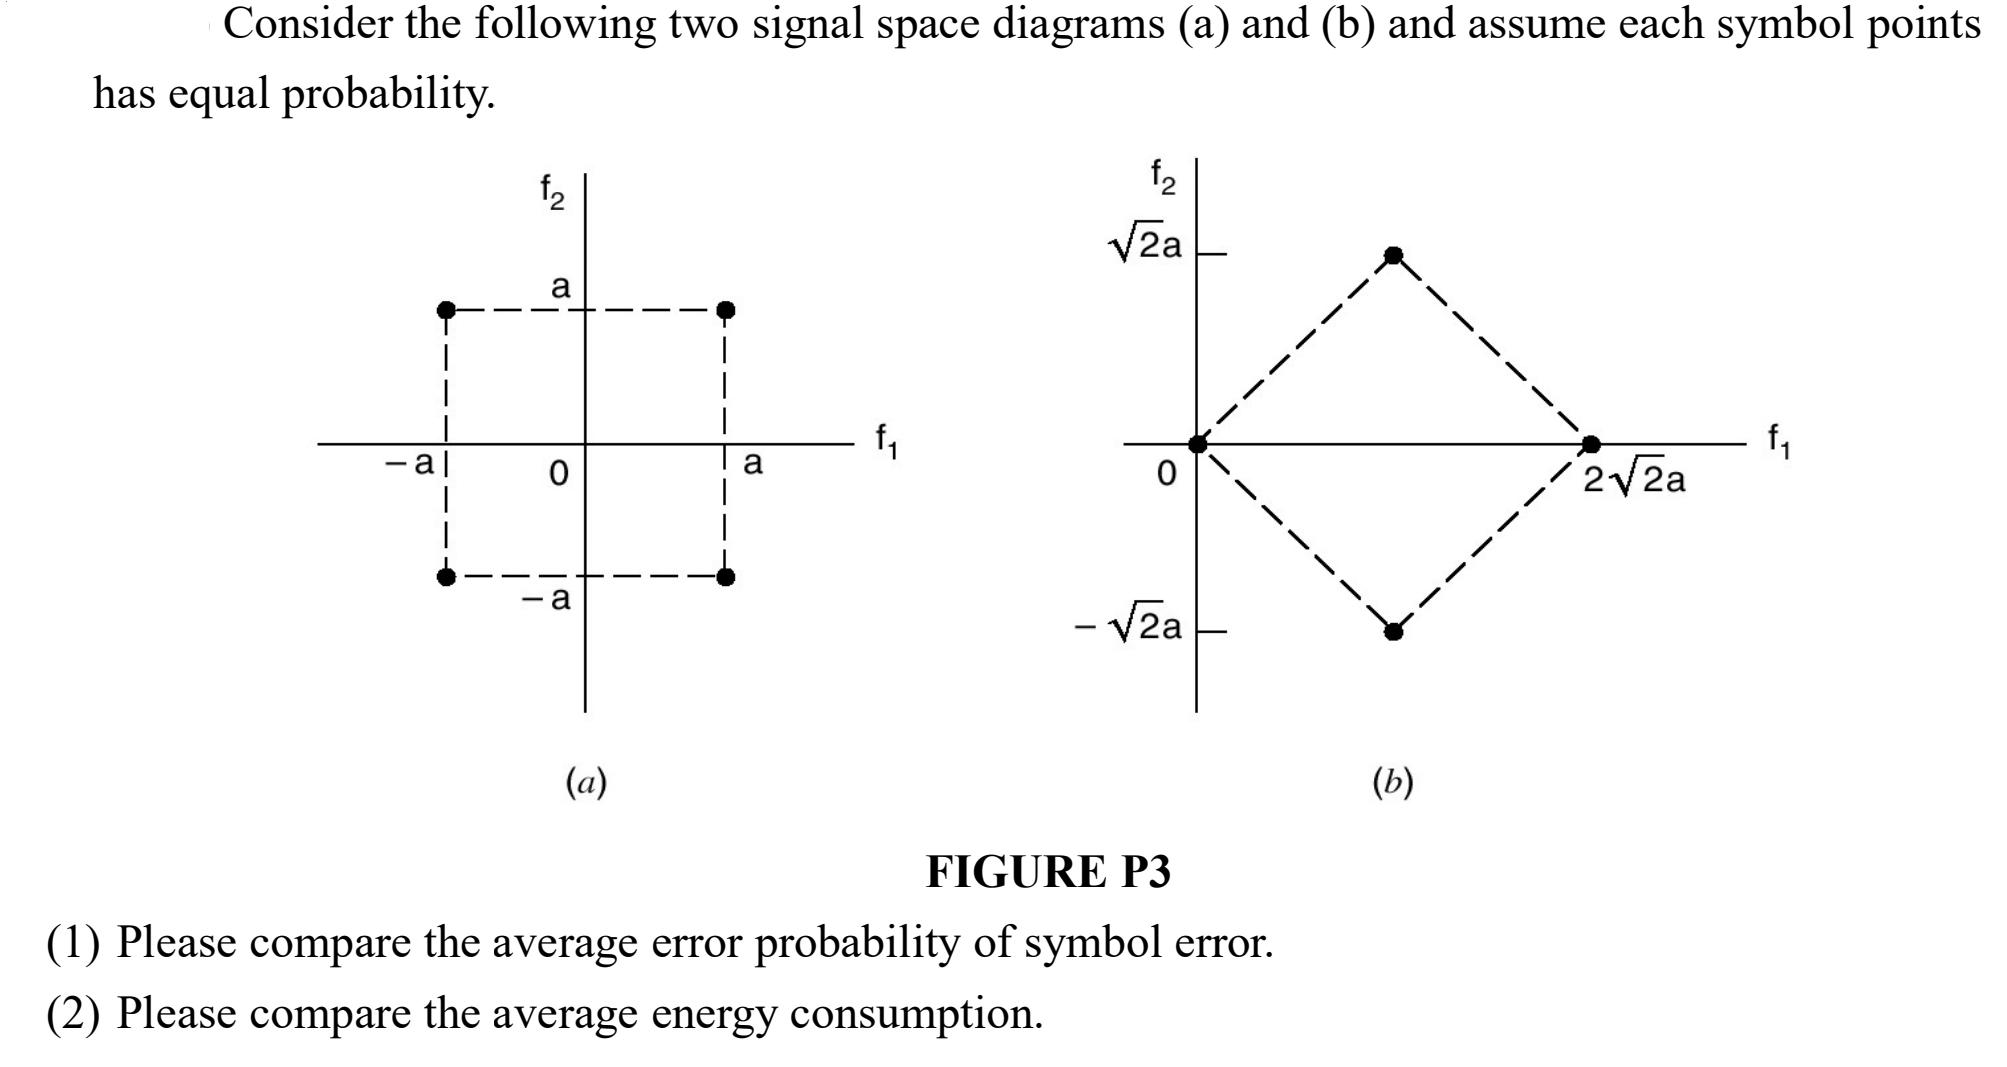 Consider the following two signal space diagrams (a) and (b) and assume each symbol points has equal